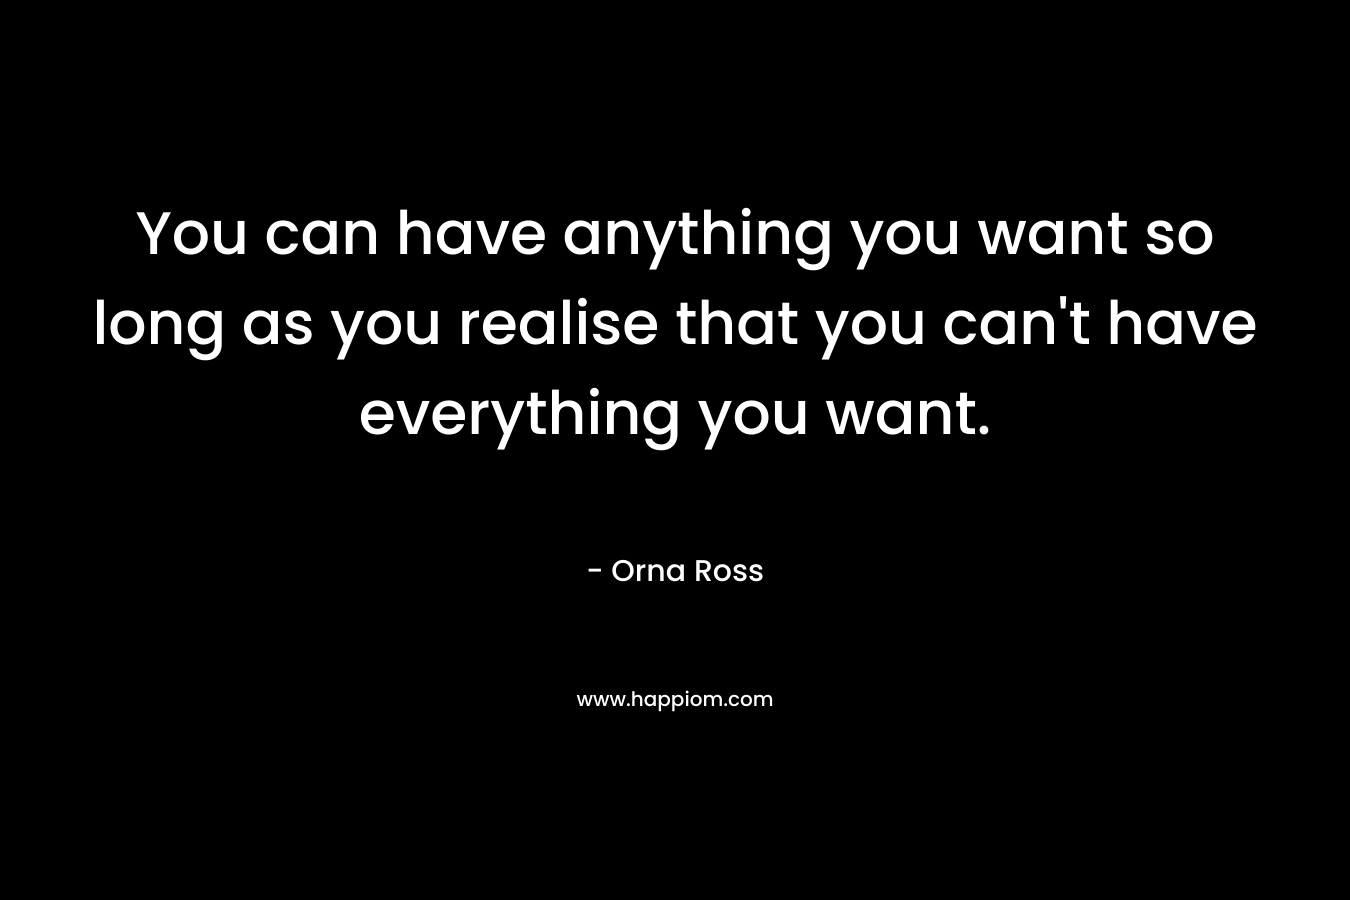 You can have anything you want so long as you realise that you can't have everything you want.